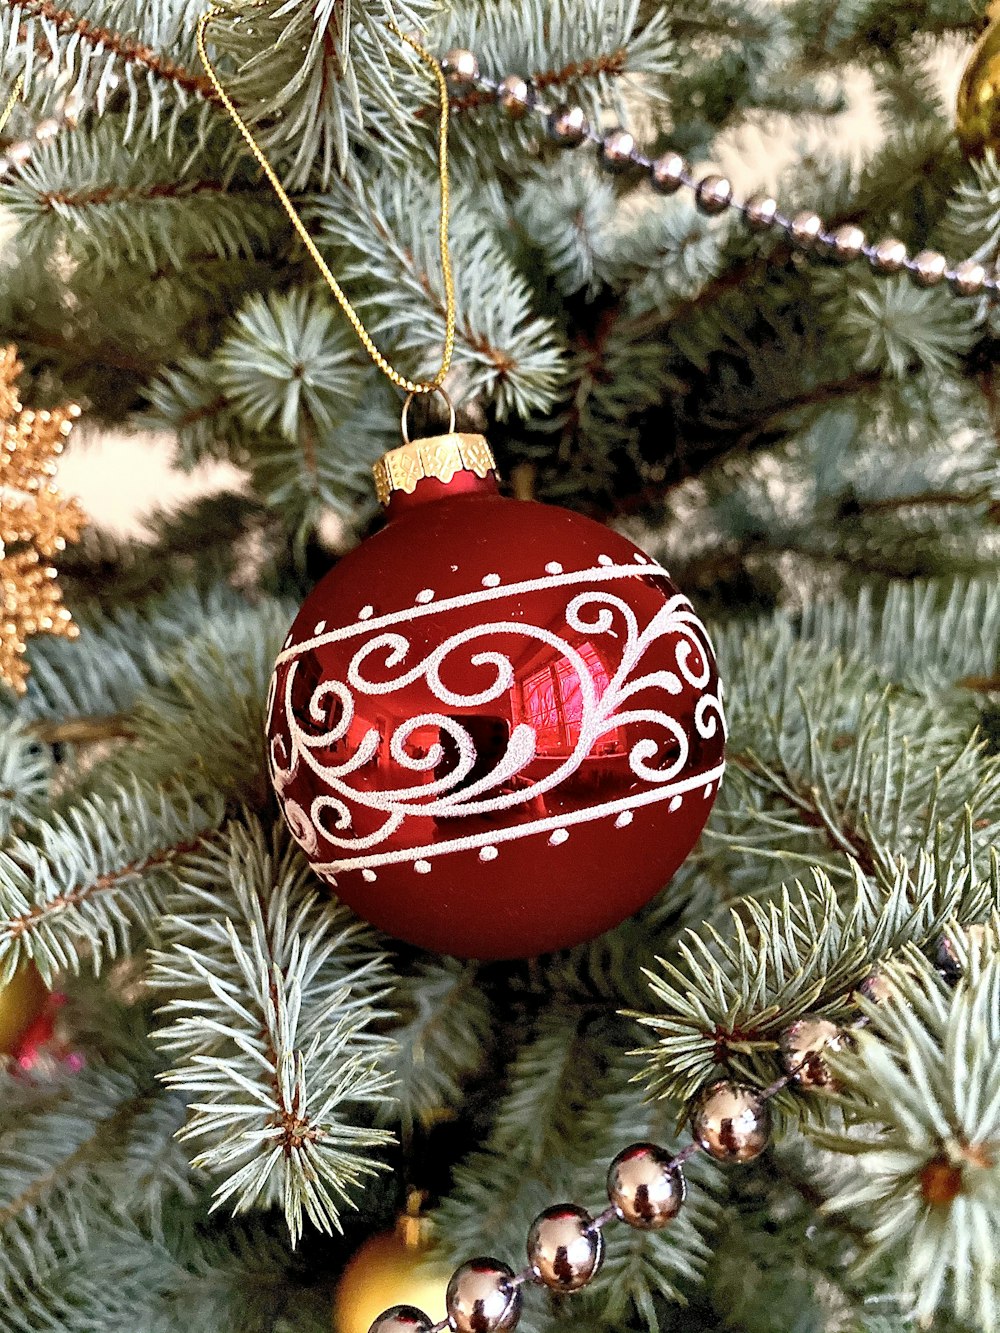 Christmas Ornaments Pictures | Download Free Images on Unsplash